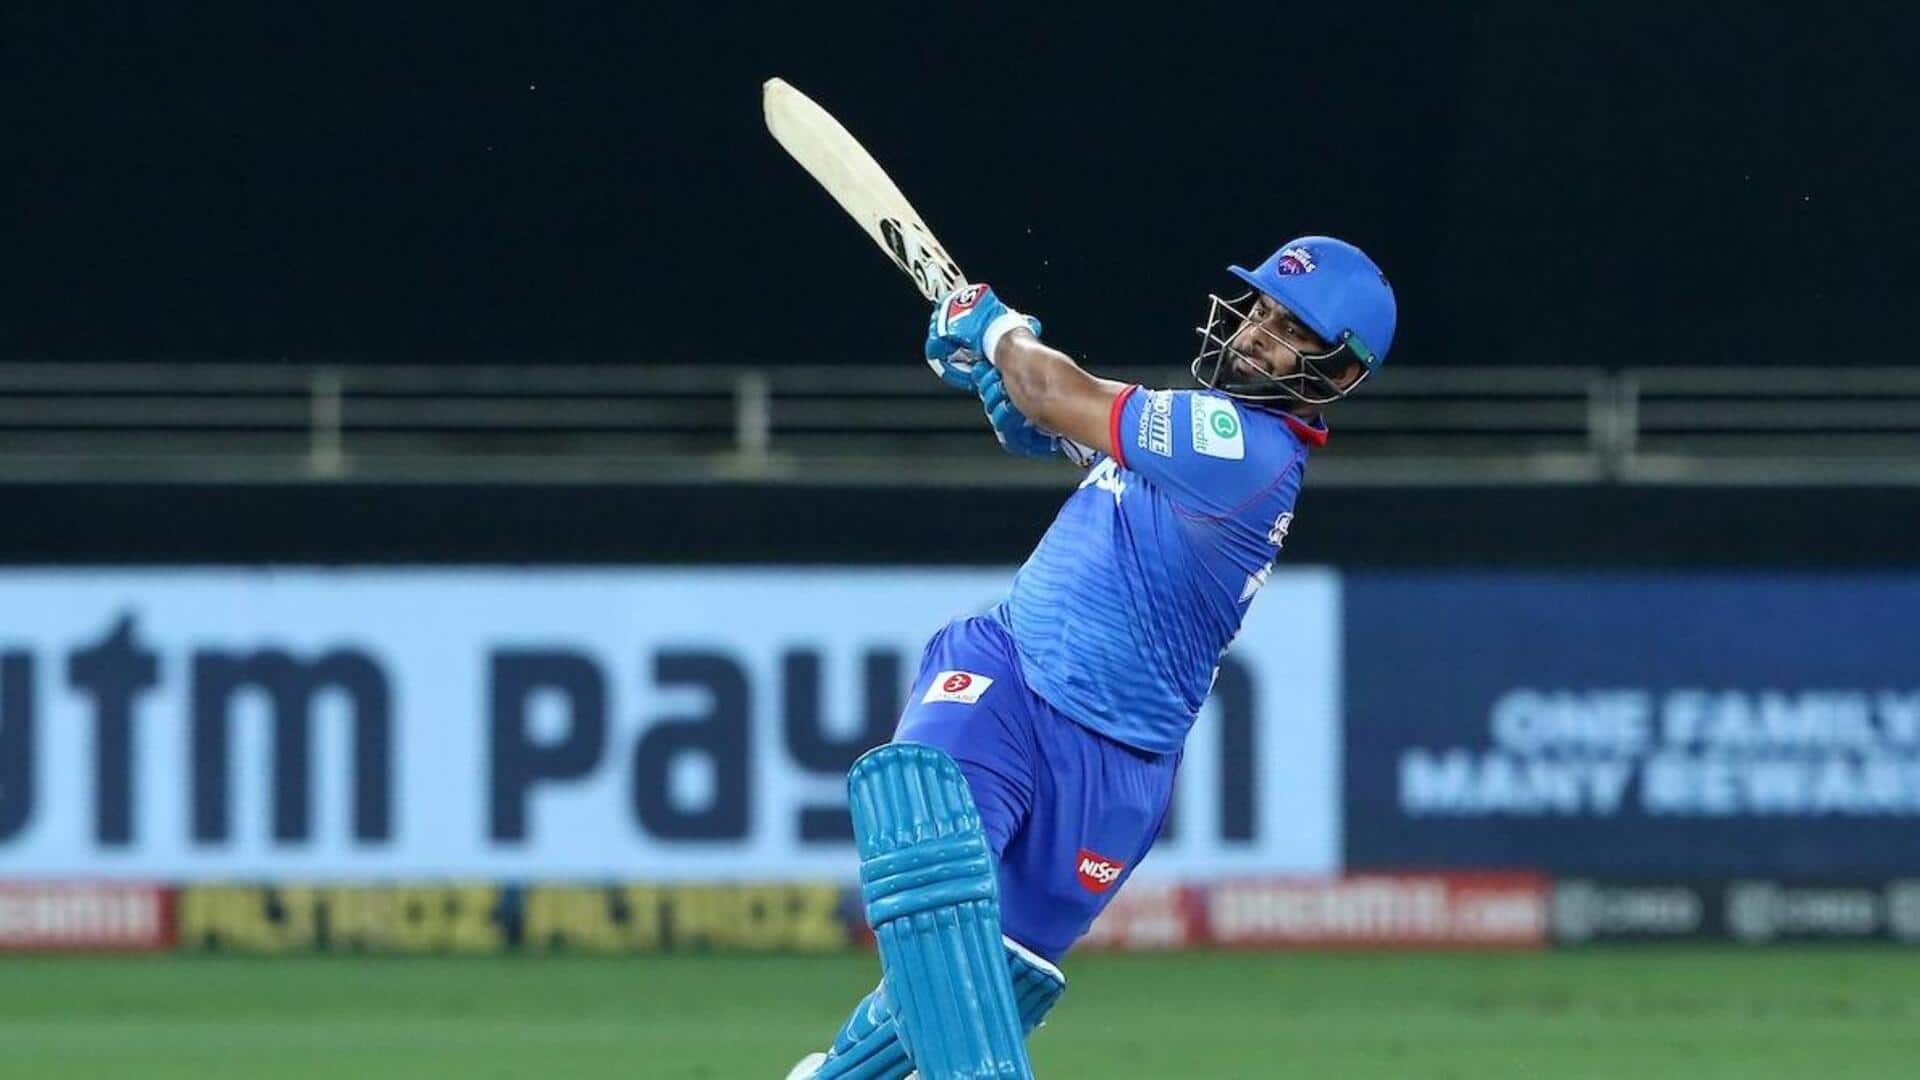 Rishabh Pant features in his 100th IPL encounter: Key stats